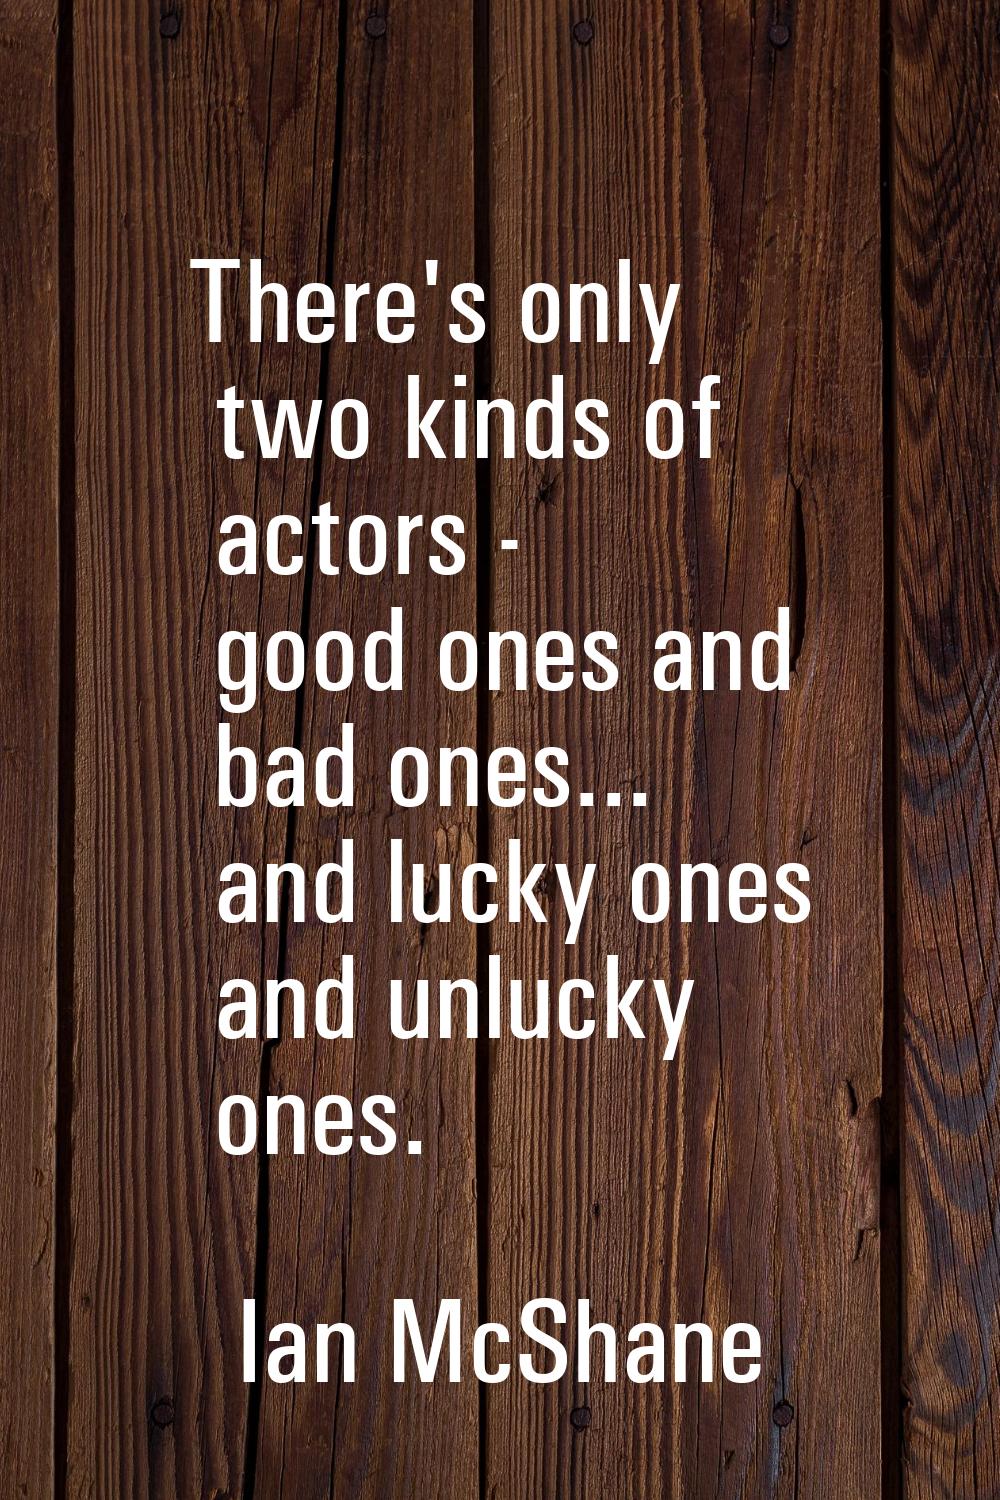 There's only two kinds of actors - good ones and bad ones... and lucky ones and unlucky ones.